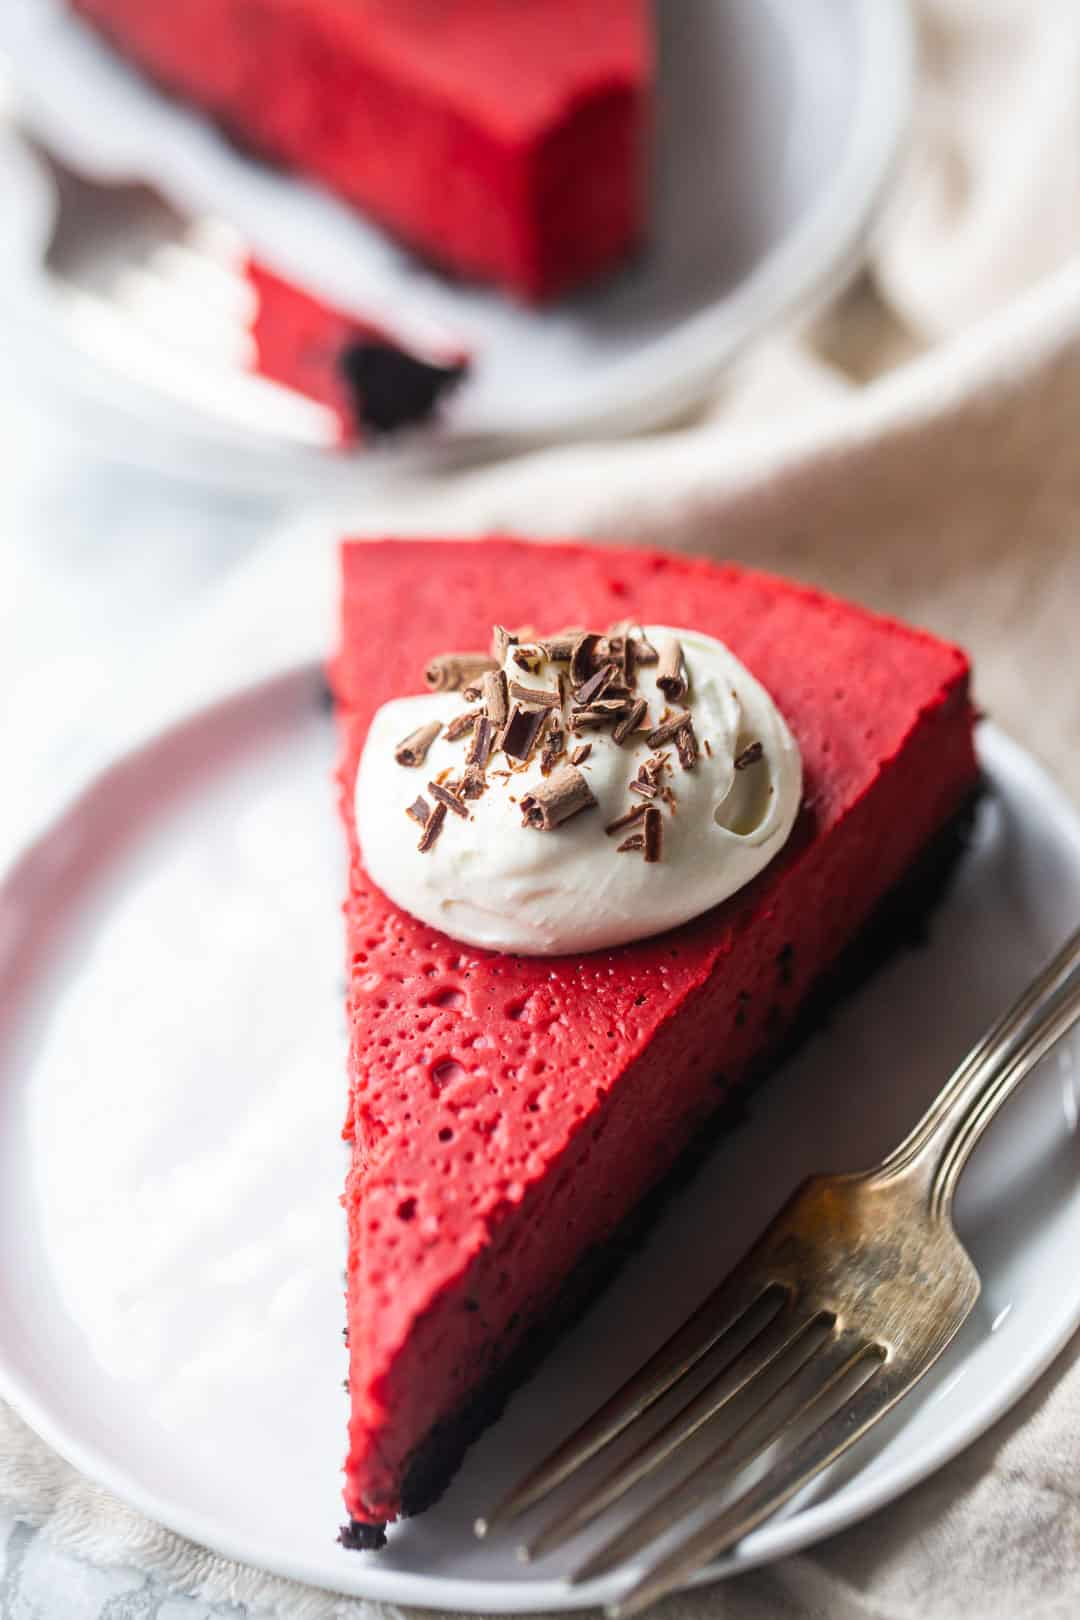 Cheesecake factory red velvet cheesecake copycat recipe, served with whipped cream and chocolate shavings.